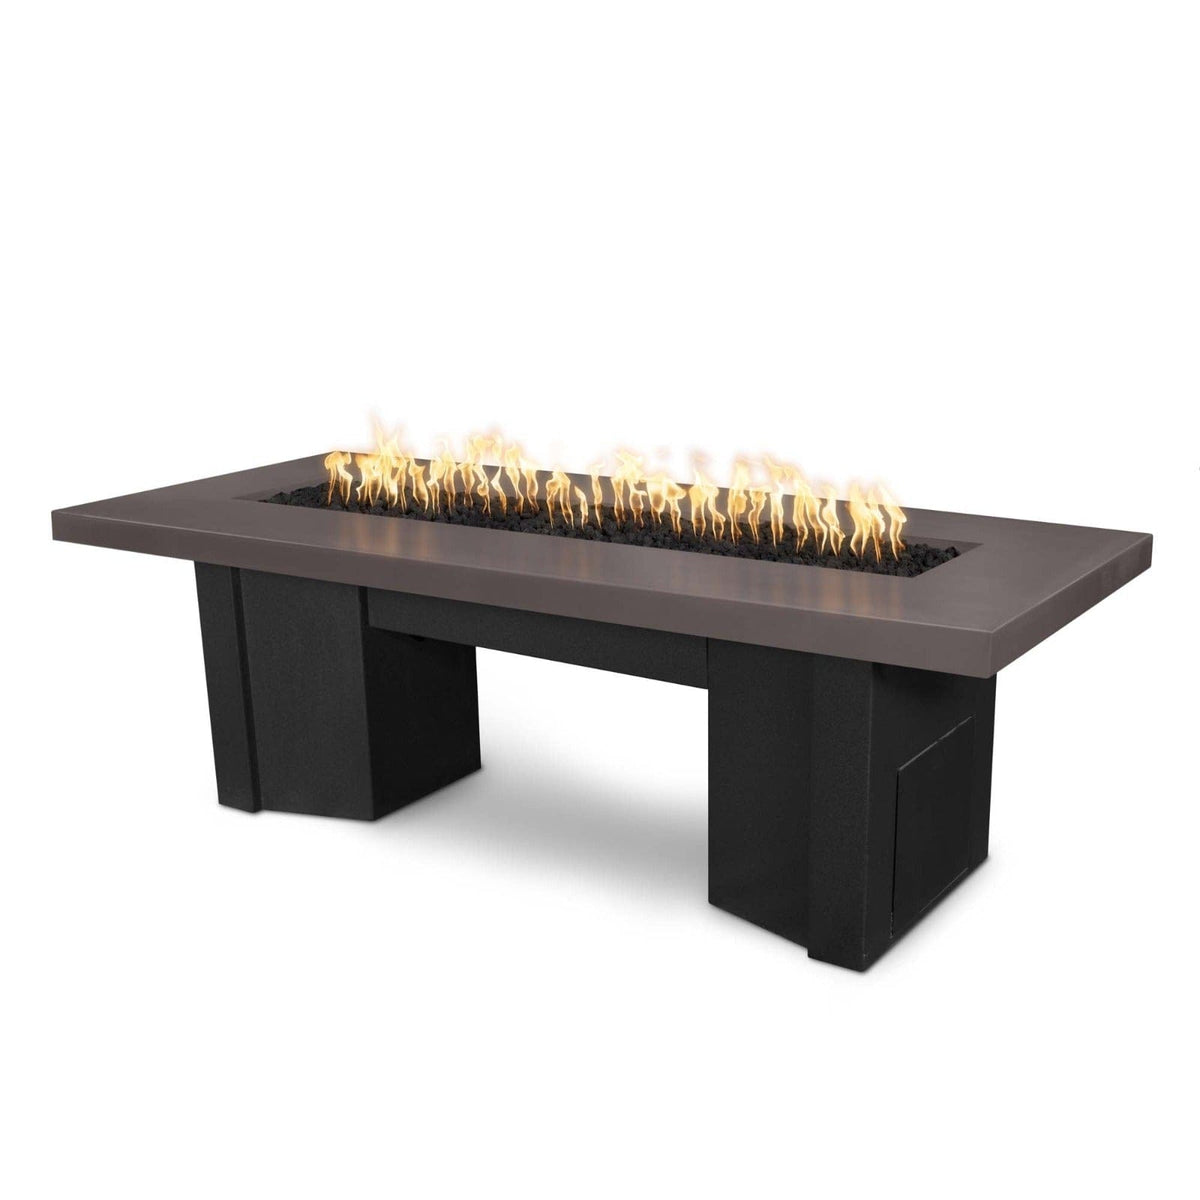 The Outdoor Plus Fire Features Chestnut (-CST) / Black Powder Coated Steel (-BLK) The Outdoor Plus 60&quot; Alameda Fire Table Smooth Concrete in Liquid Propane - Flame Sense System with Push Button Spark Igniter / OPT-ALMGFRC60FSEN-LP